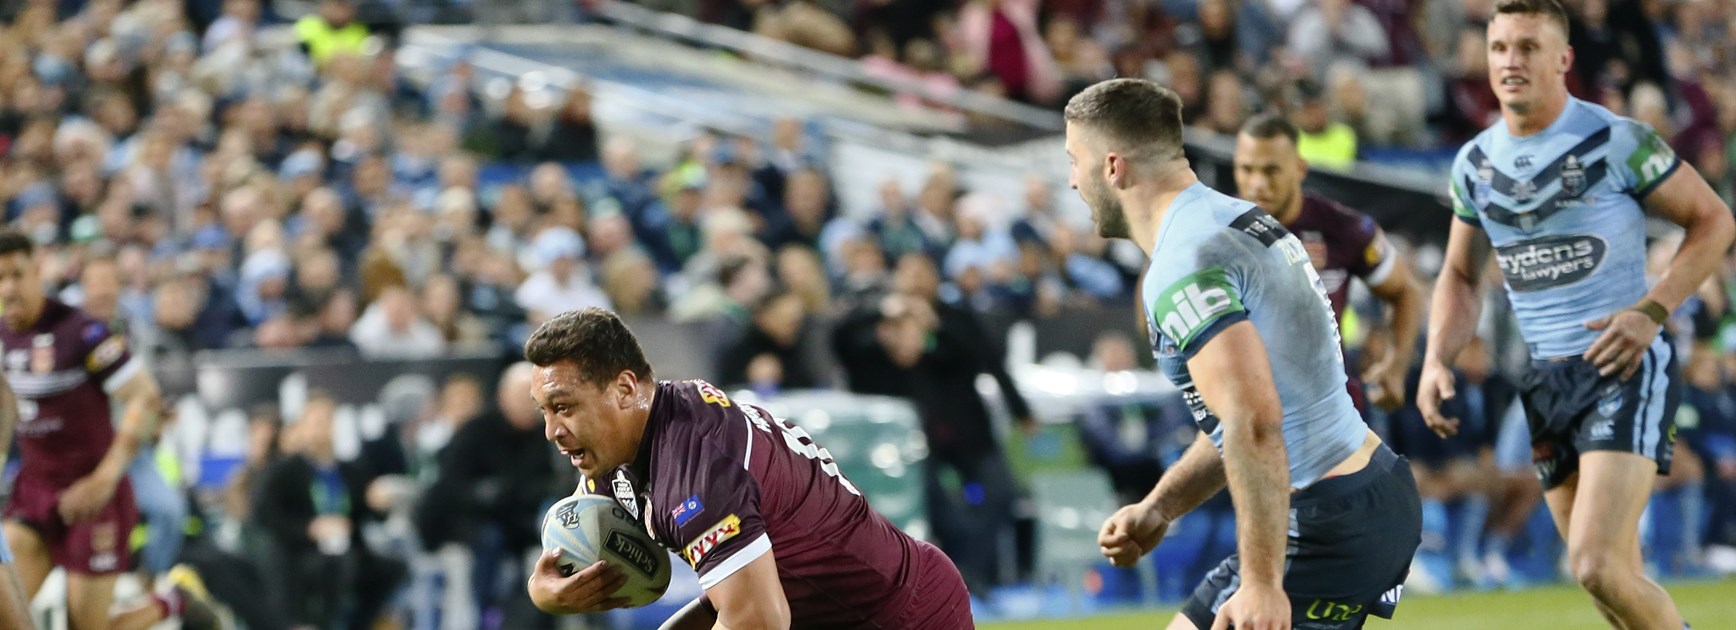 New faces shine but errors and fatigue prove too much for Maroons